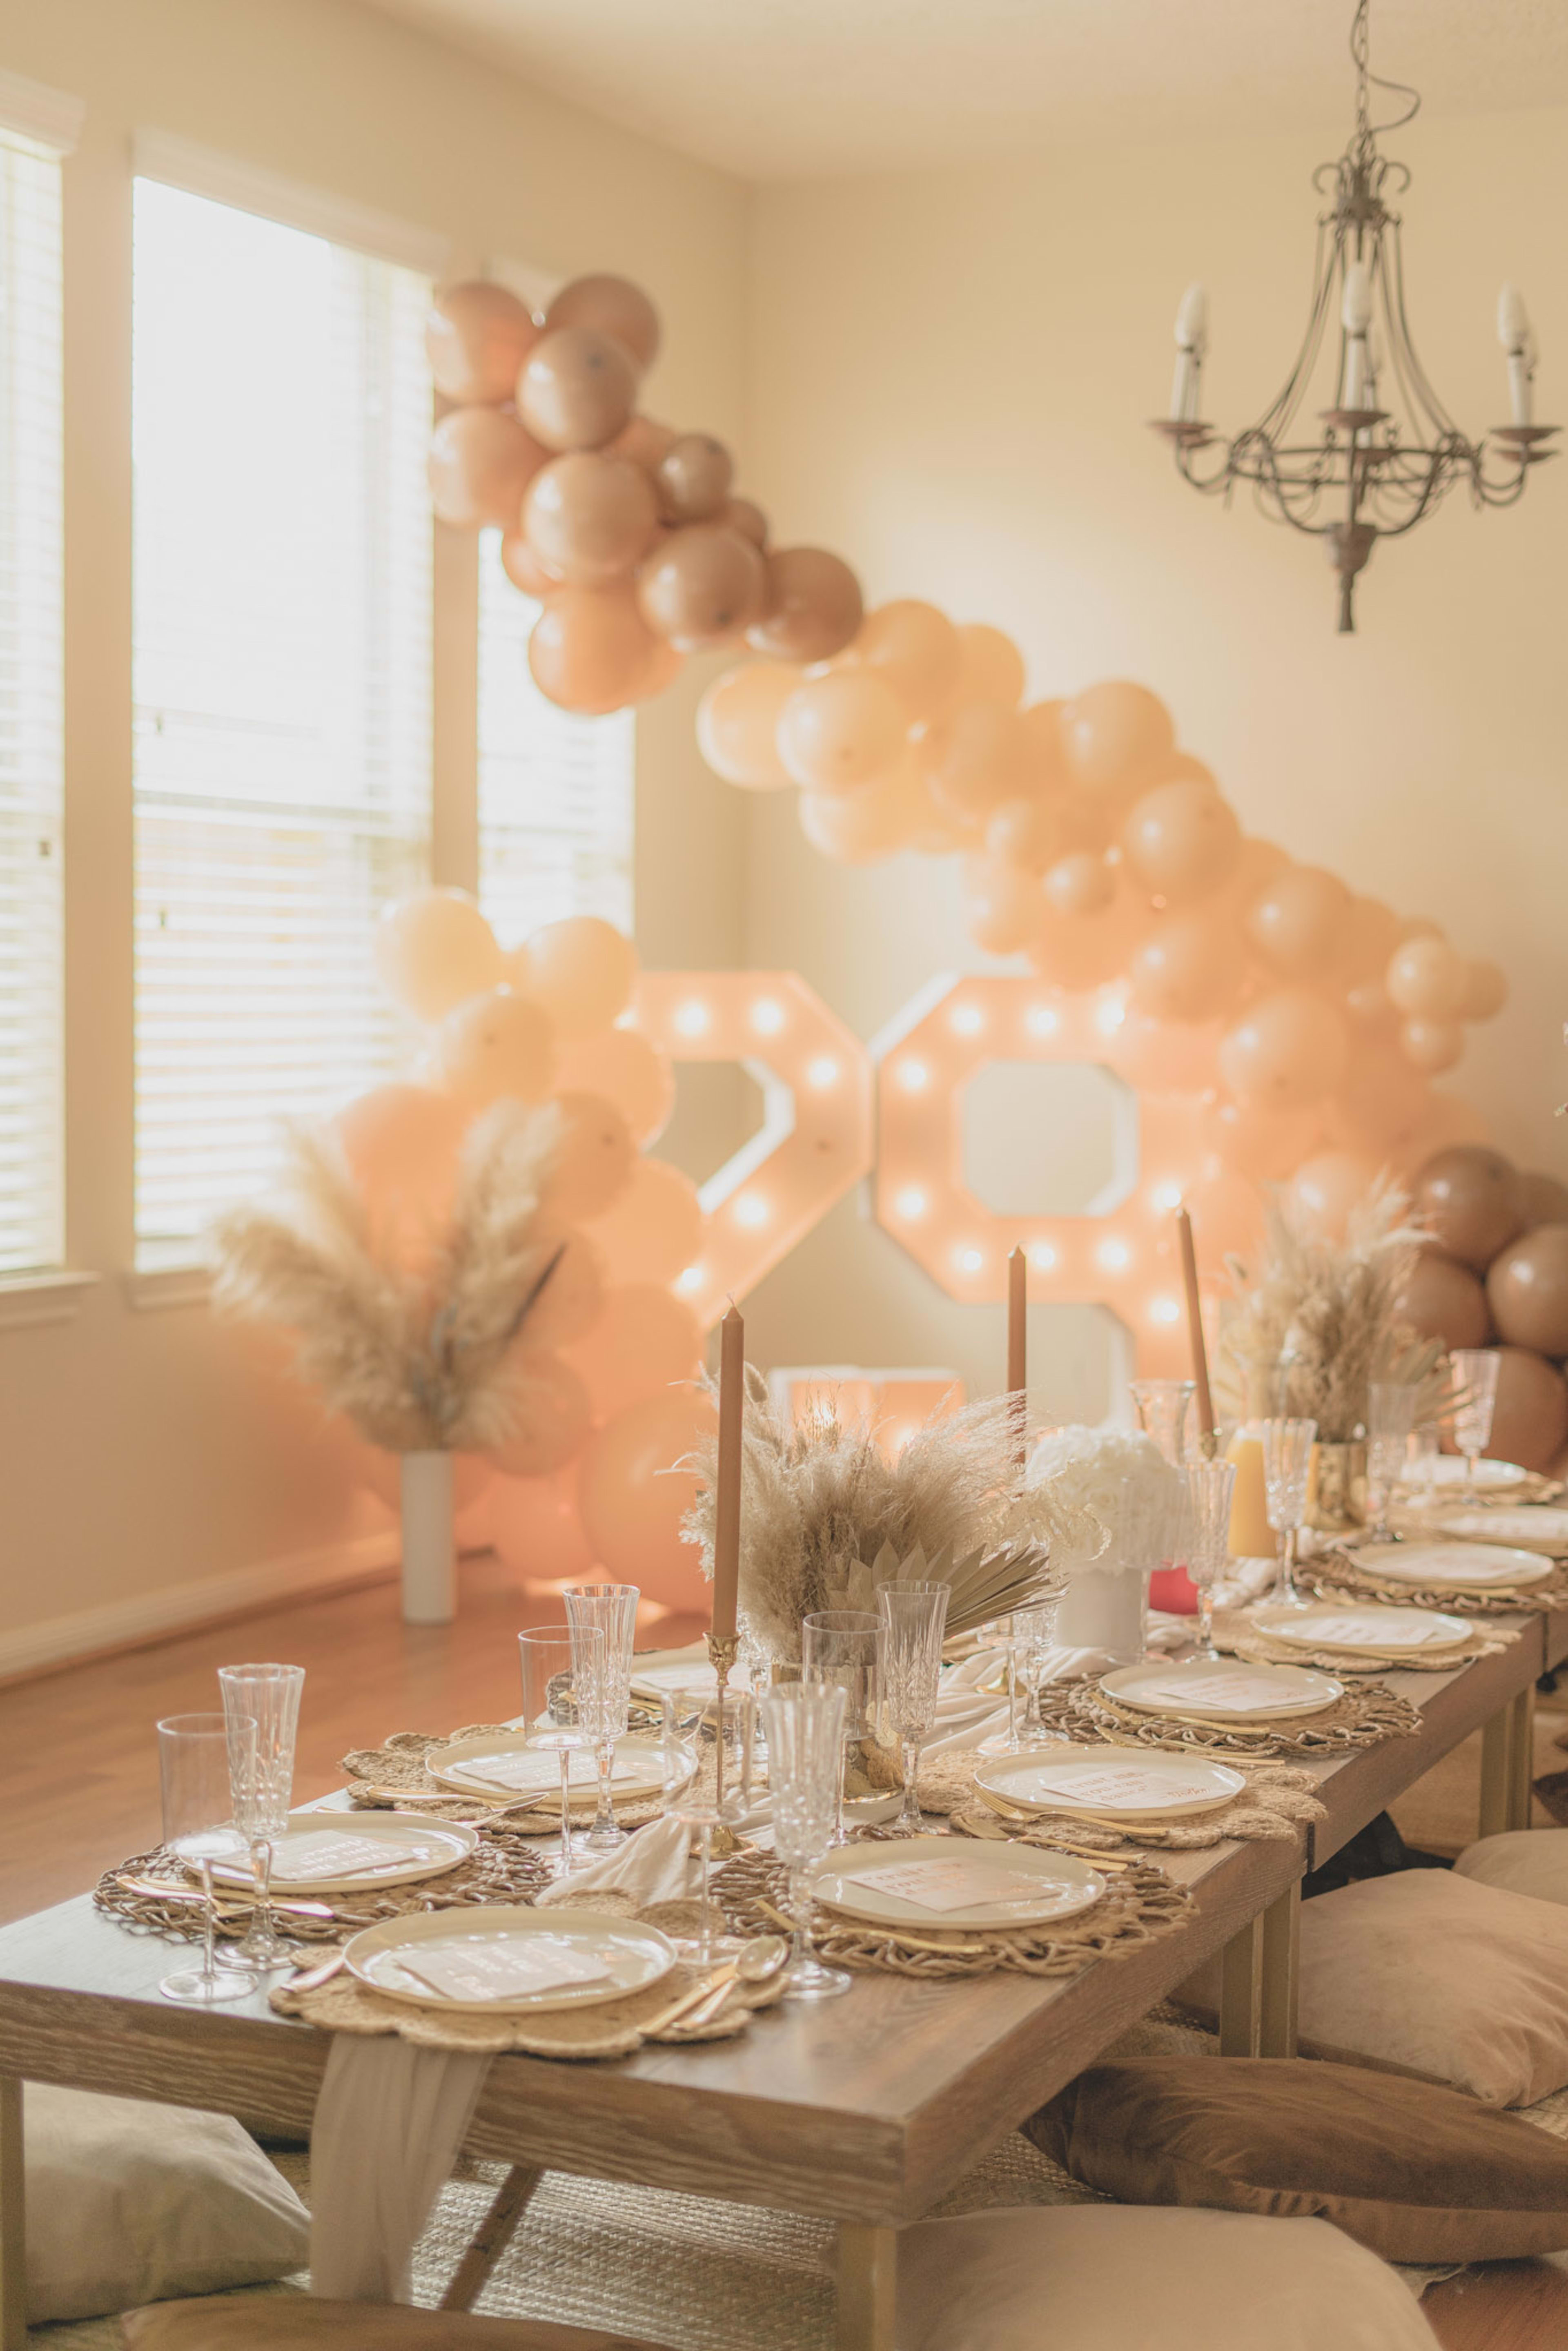 A boho dining room table set for a birthday party.